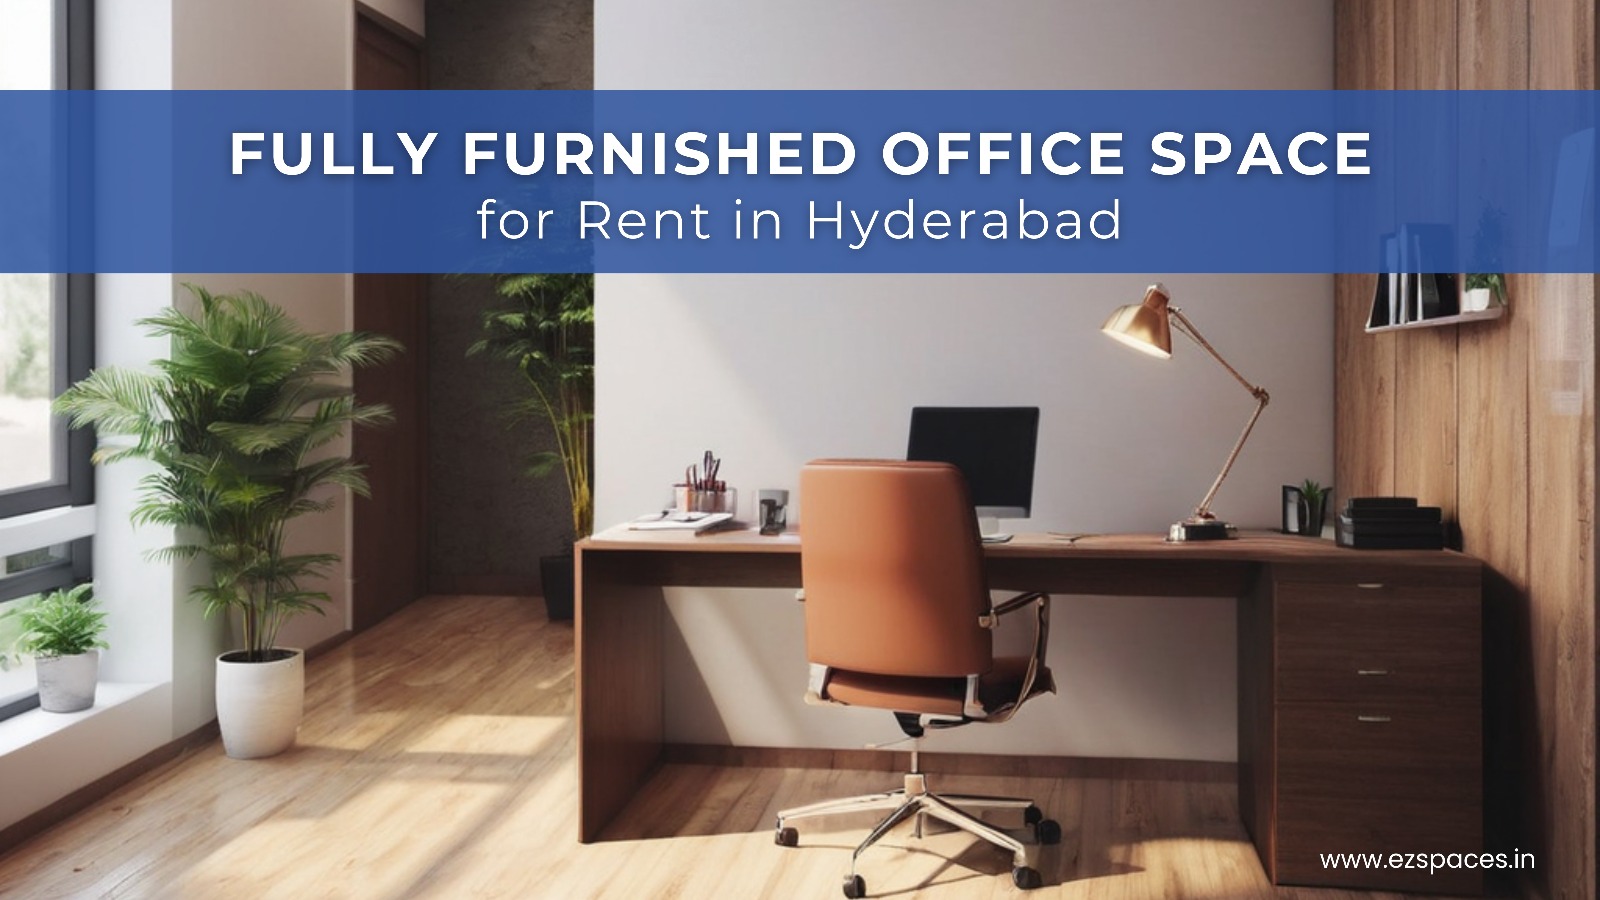 Fully Furnished Office Space For Rent In Hyderabad